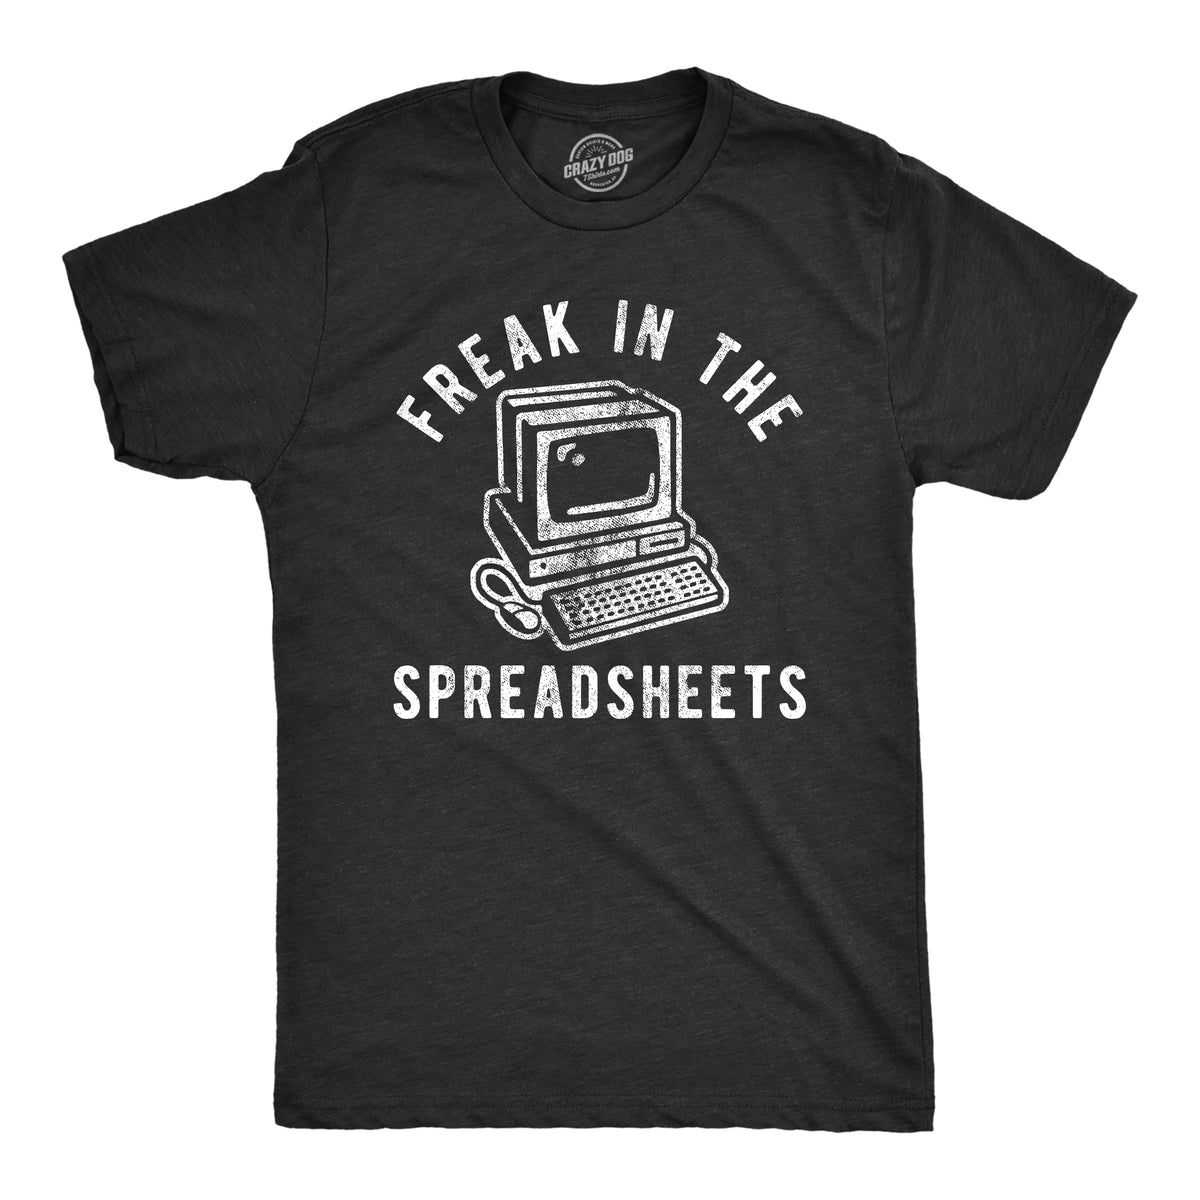 Funny Heather Black - Speadsheets Freak In The Spreadsheets Mens T Shirt Nerdy Nerdy Office sarcastic Tee